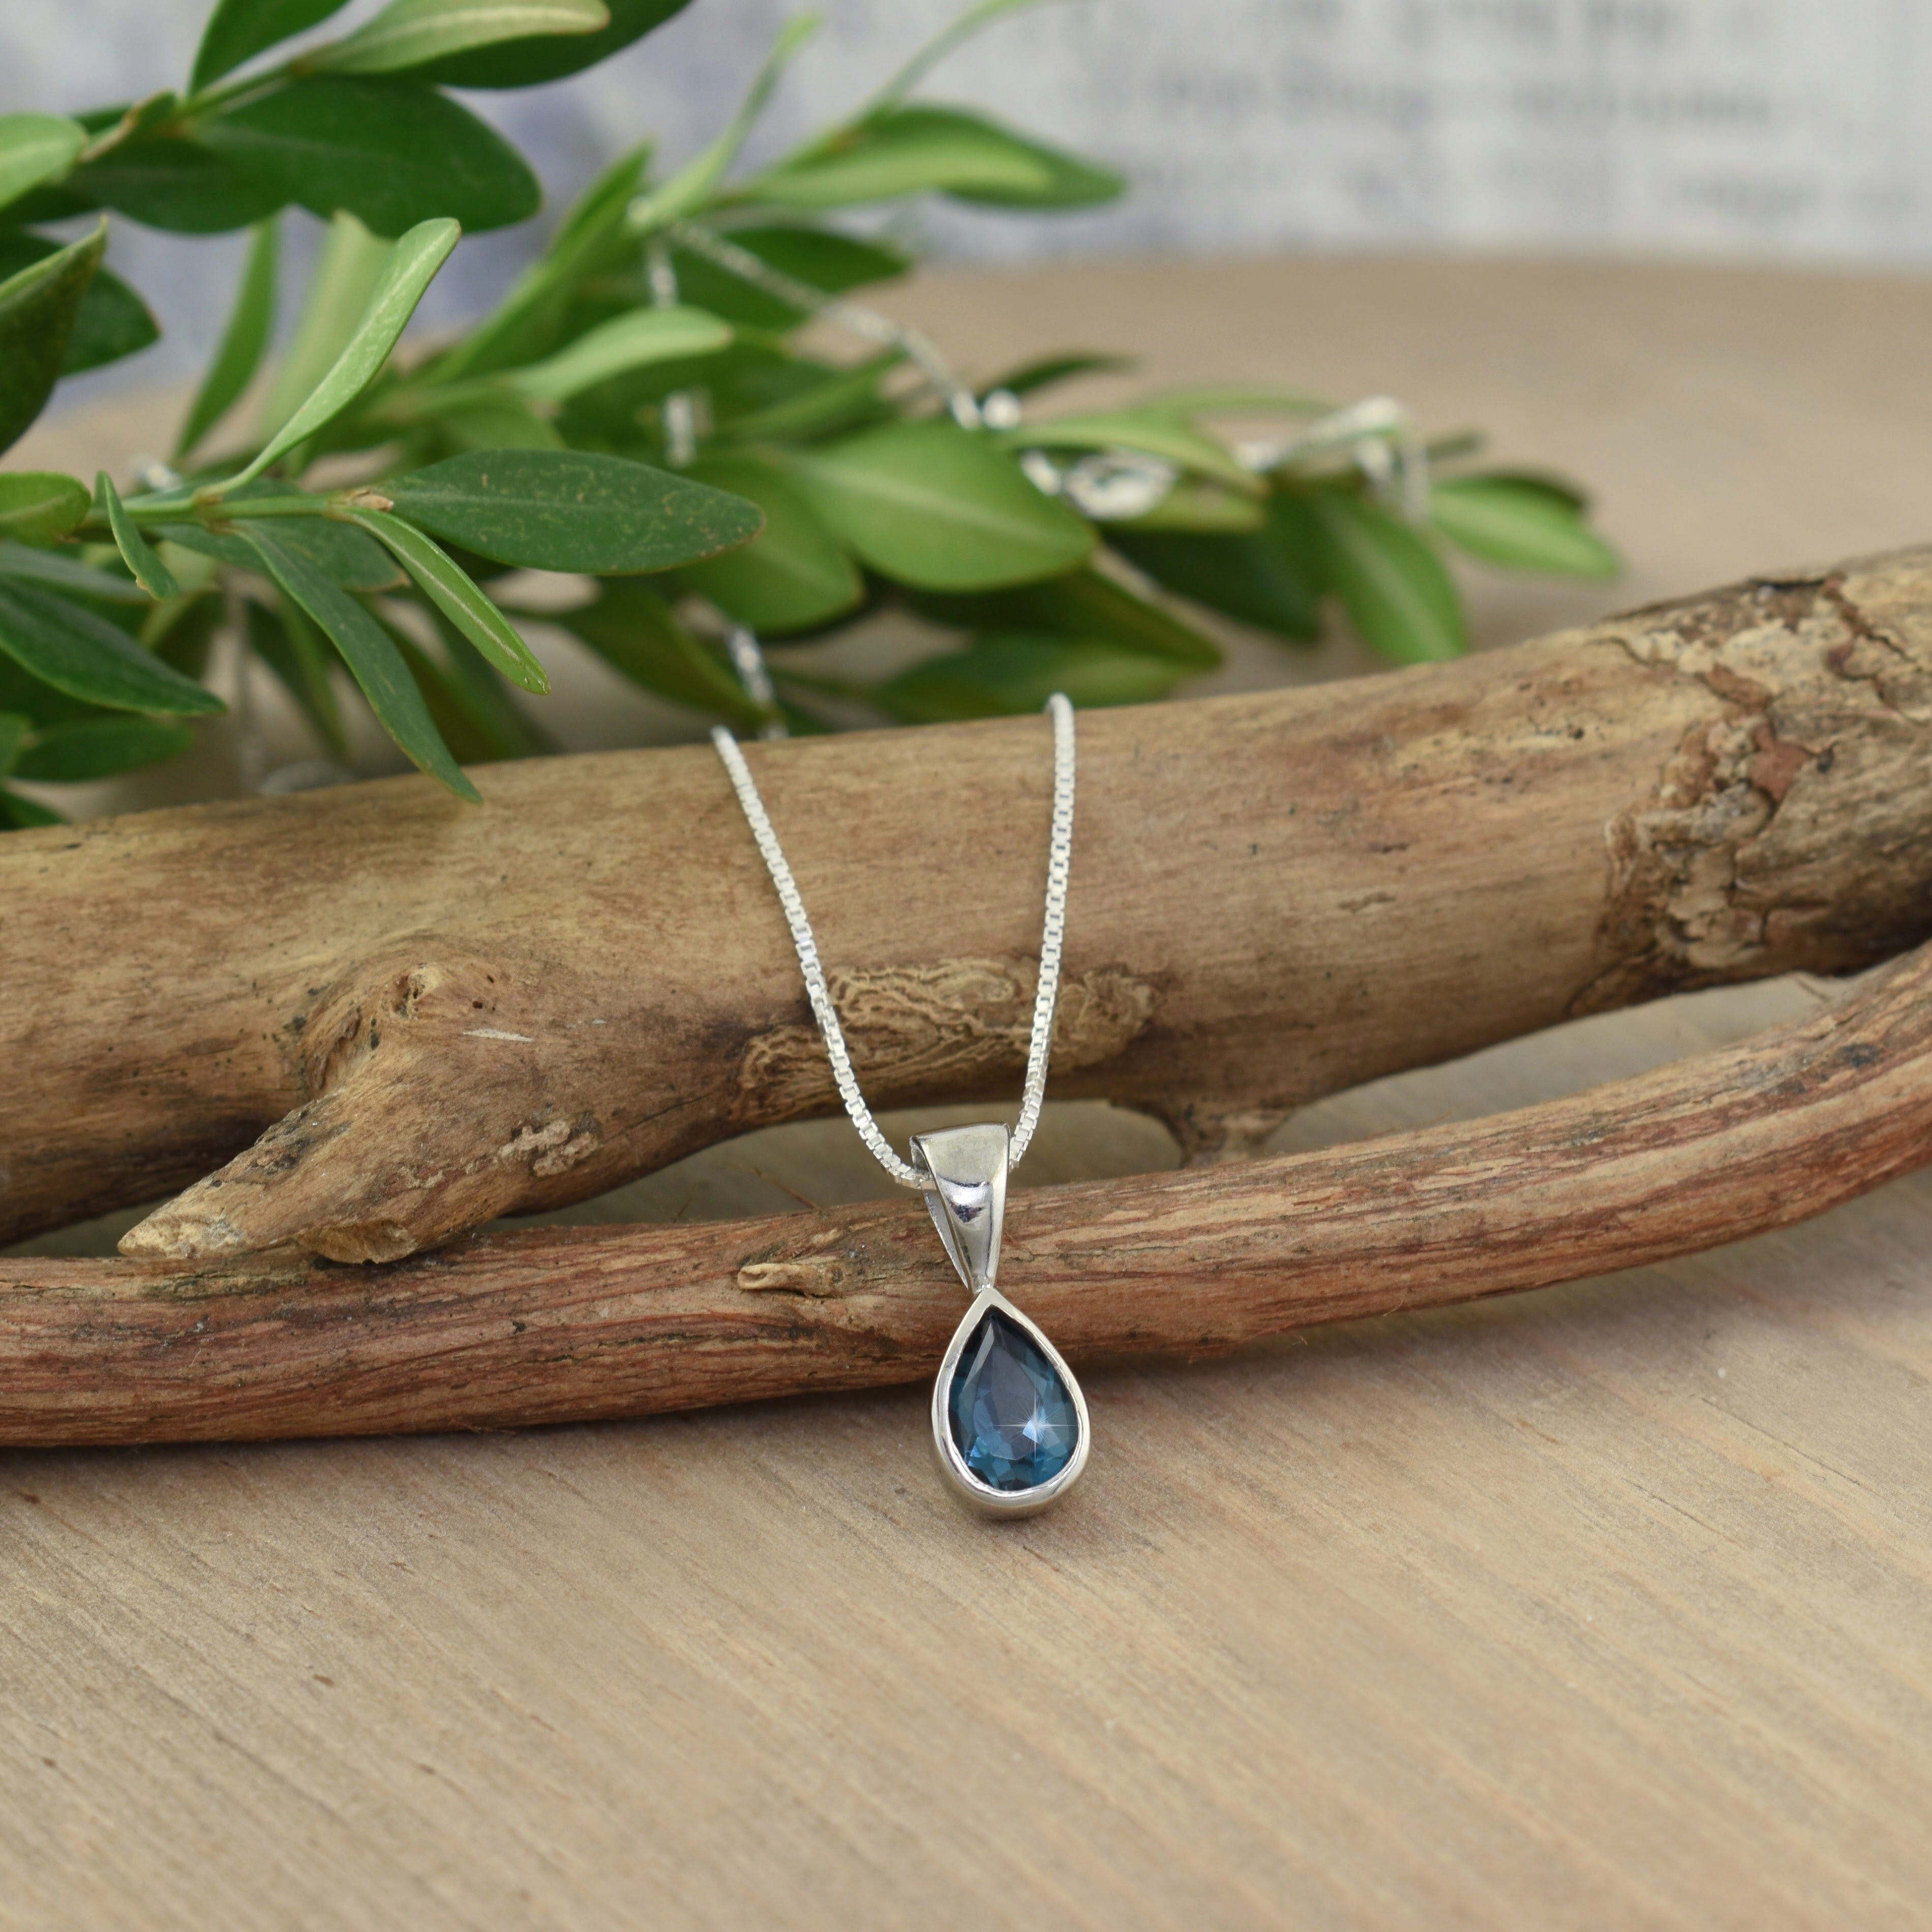 .925 sterling silver necklace featuring a London blue topaz teardrop stone